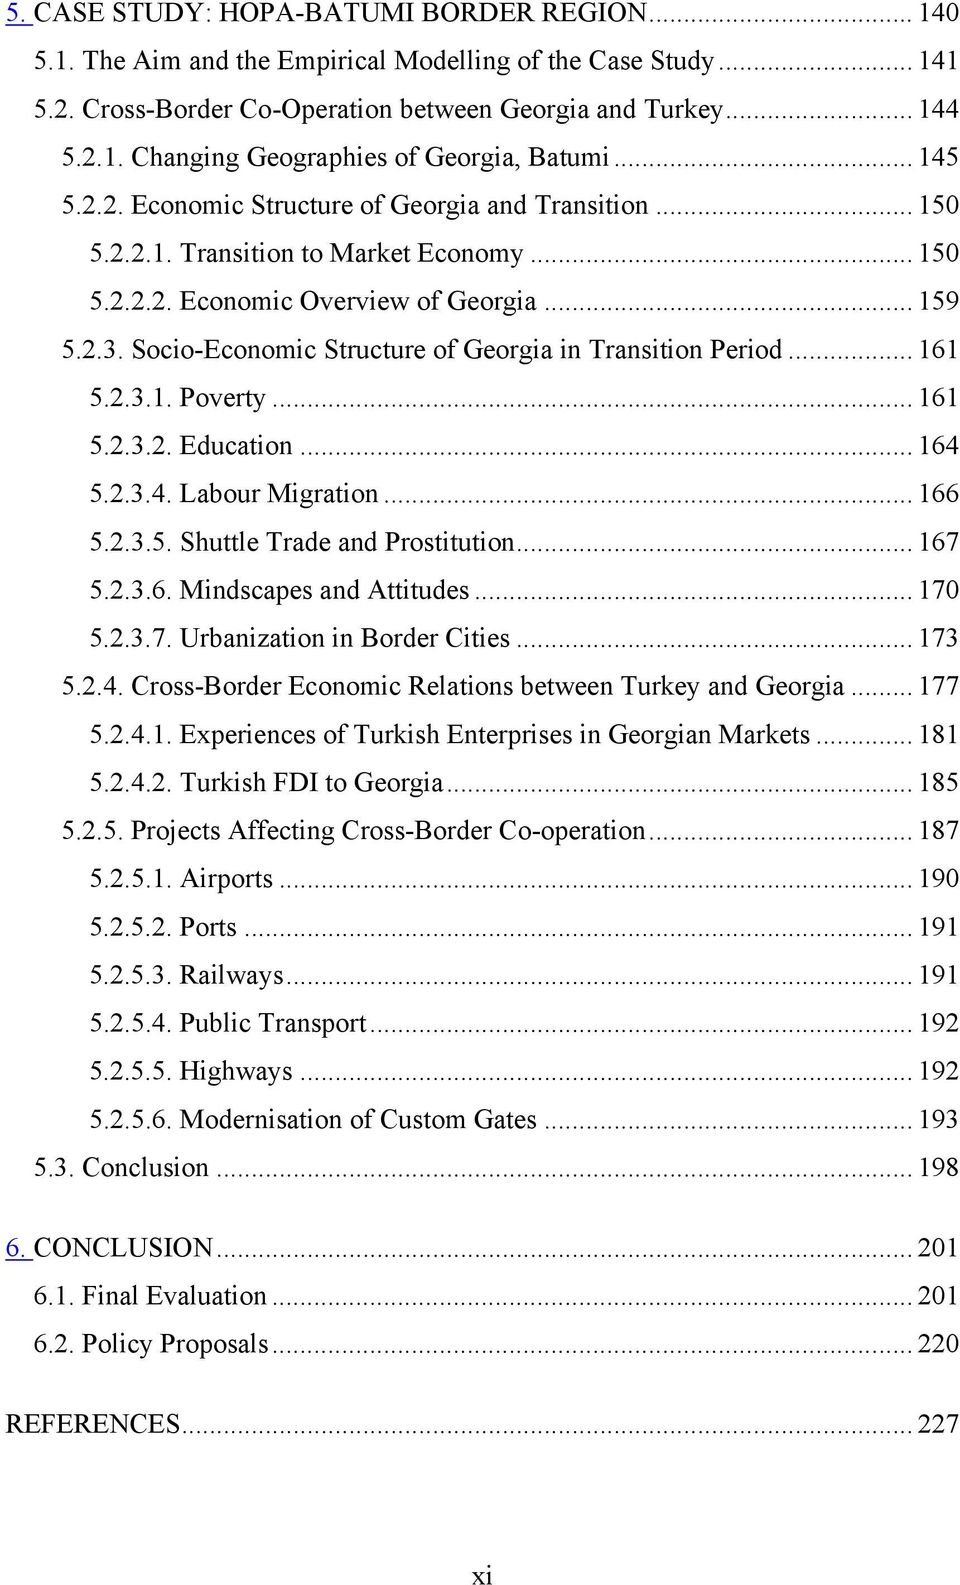 Socio-Economic Structure of Georgia in Transition Period... 161 5.2.3.1. Poverty... 161 5.2.3.2. Education... 164 5.2.3.4. Labour Migration... 166 5.2.3.5. Shuttle Trade and Prostitution... 167 5.2.3.6. Mindscapes and Attitudes.